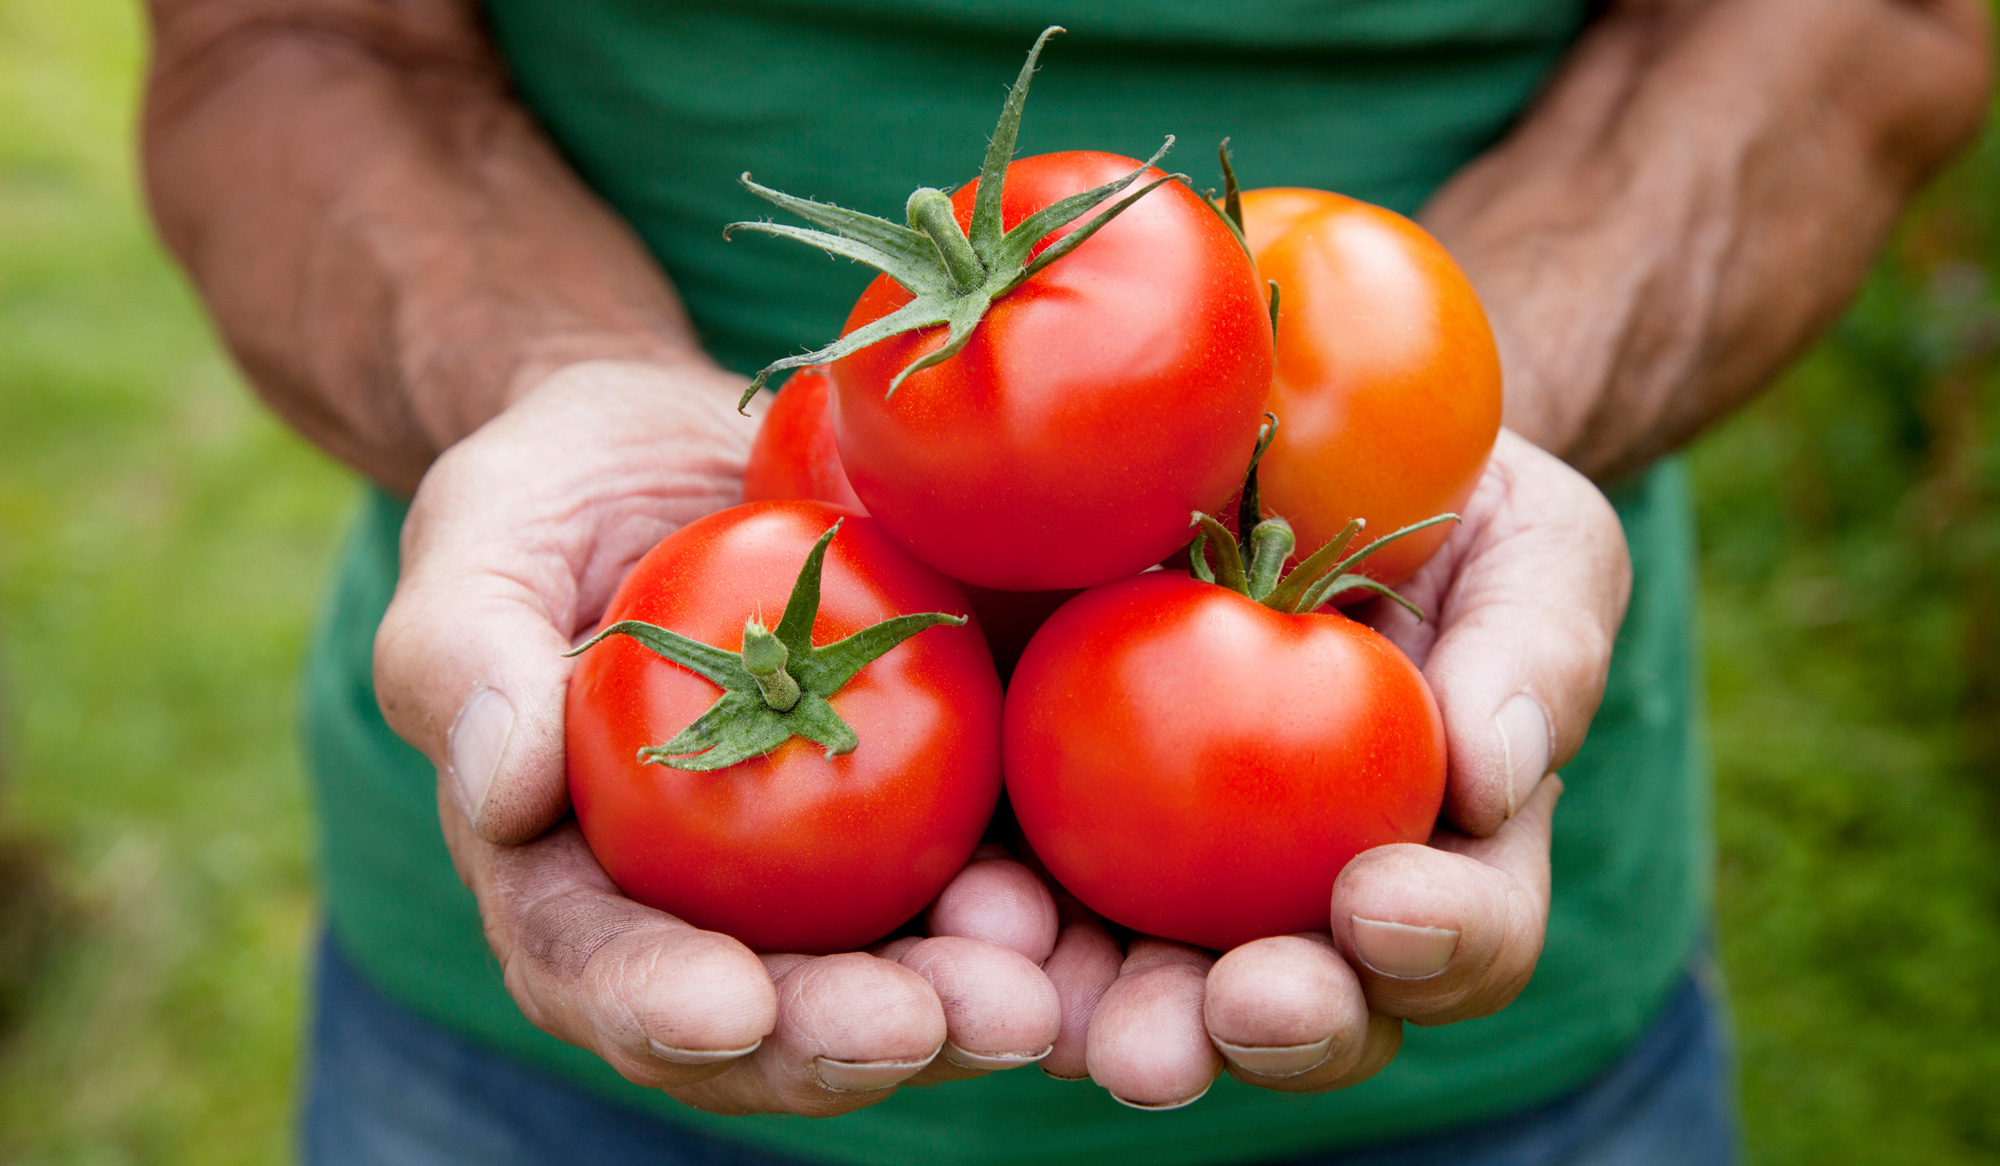 Holding Tomatoes